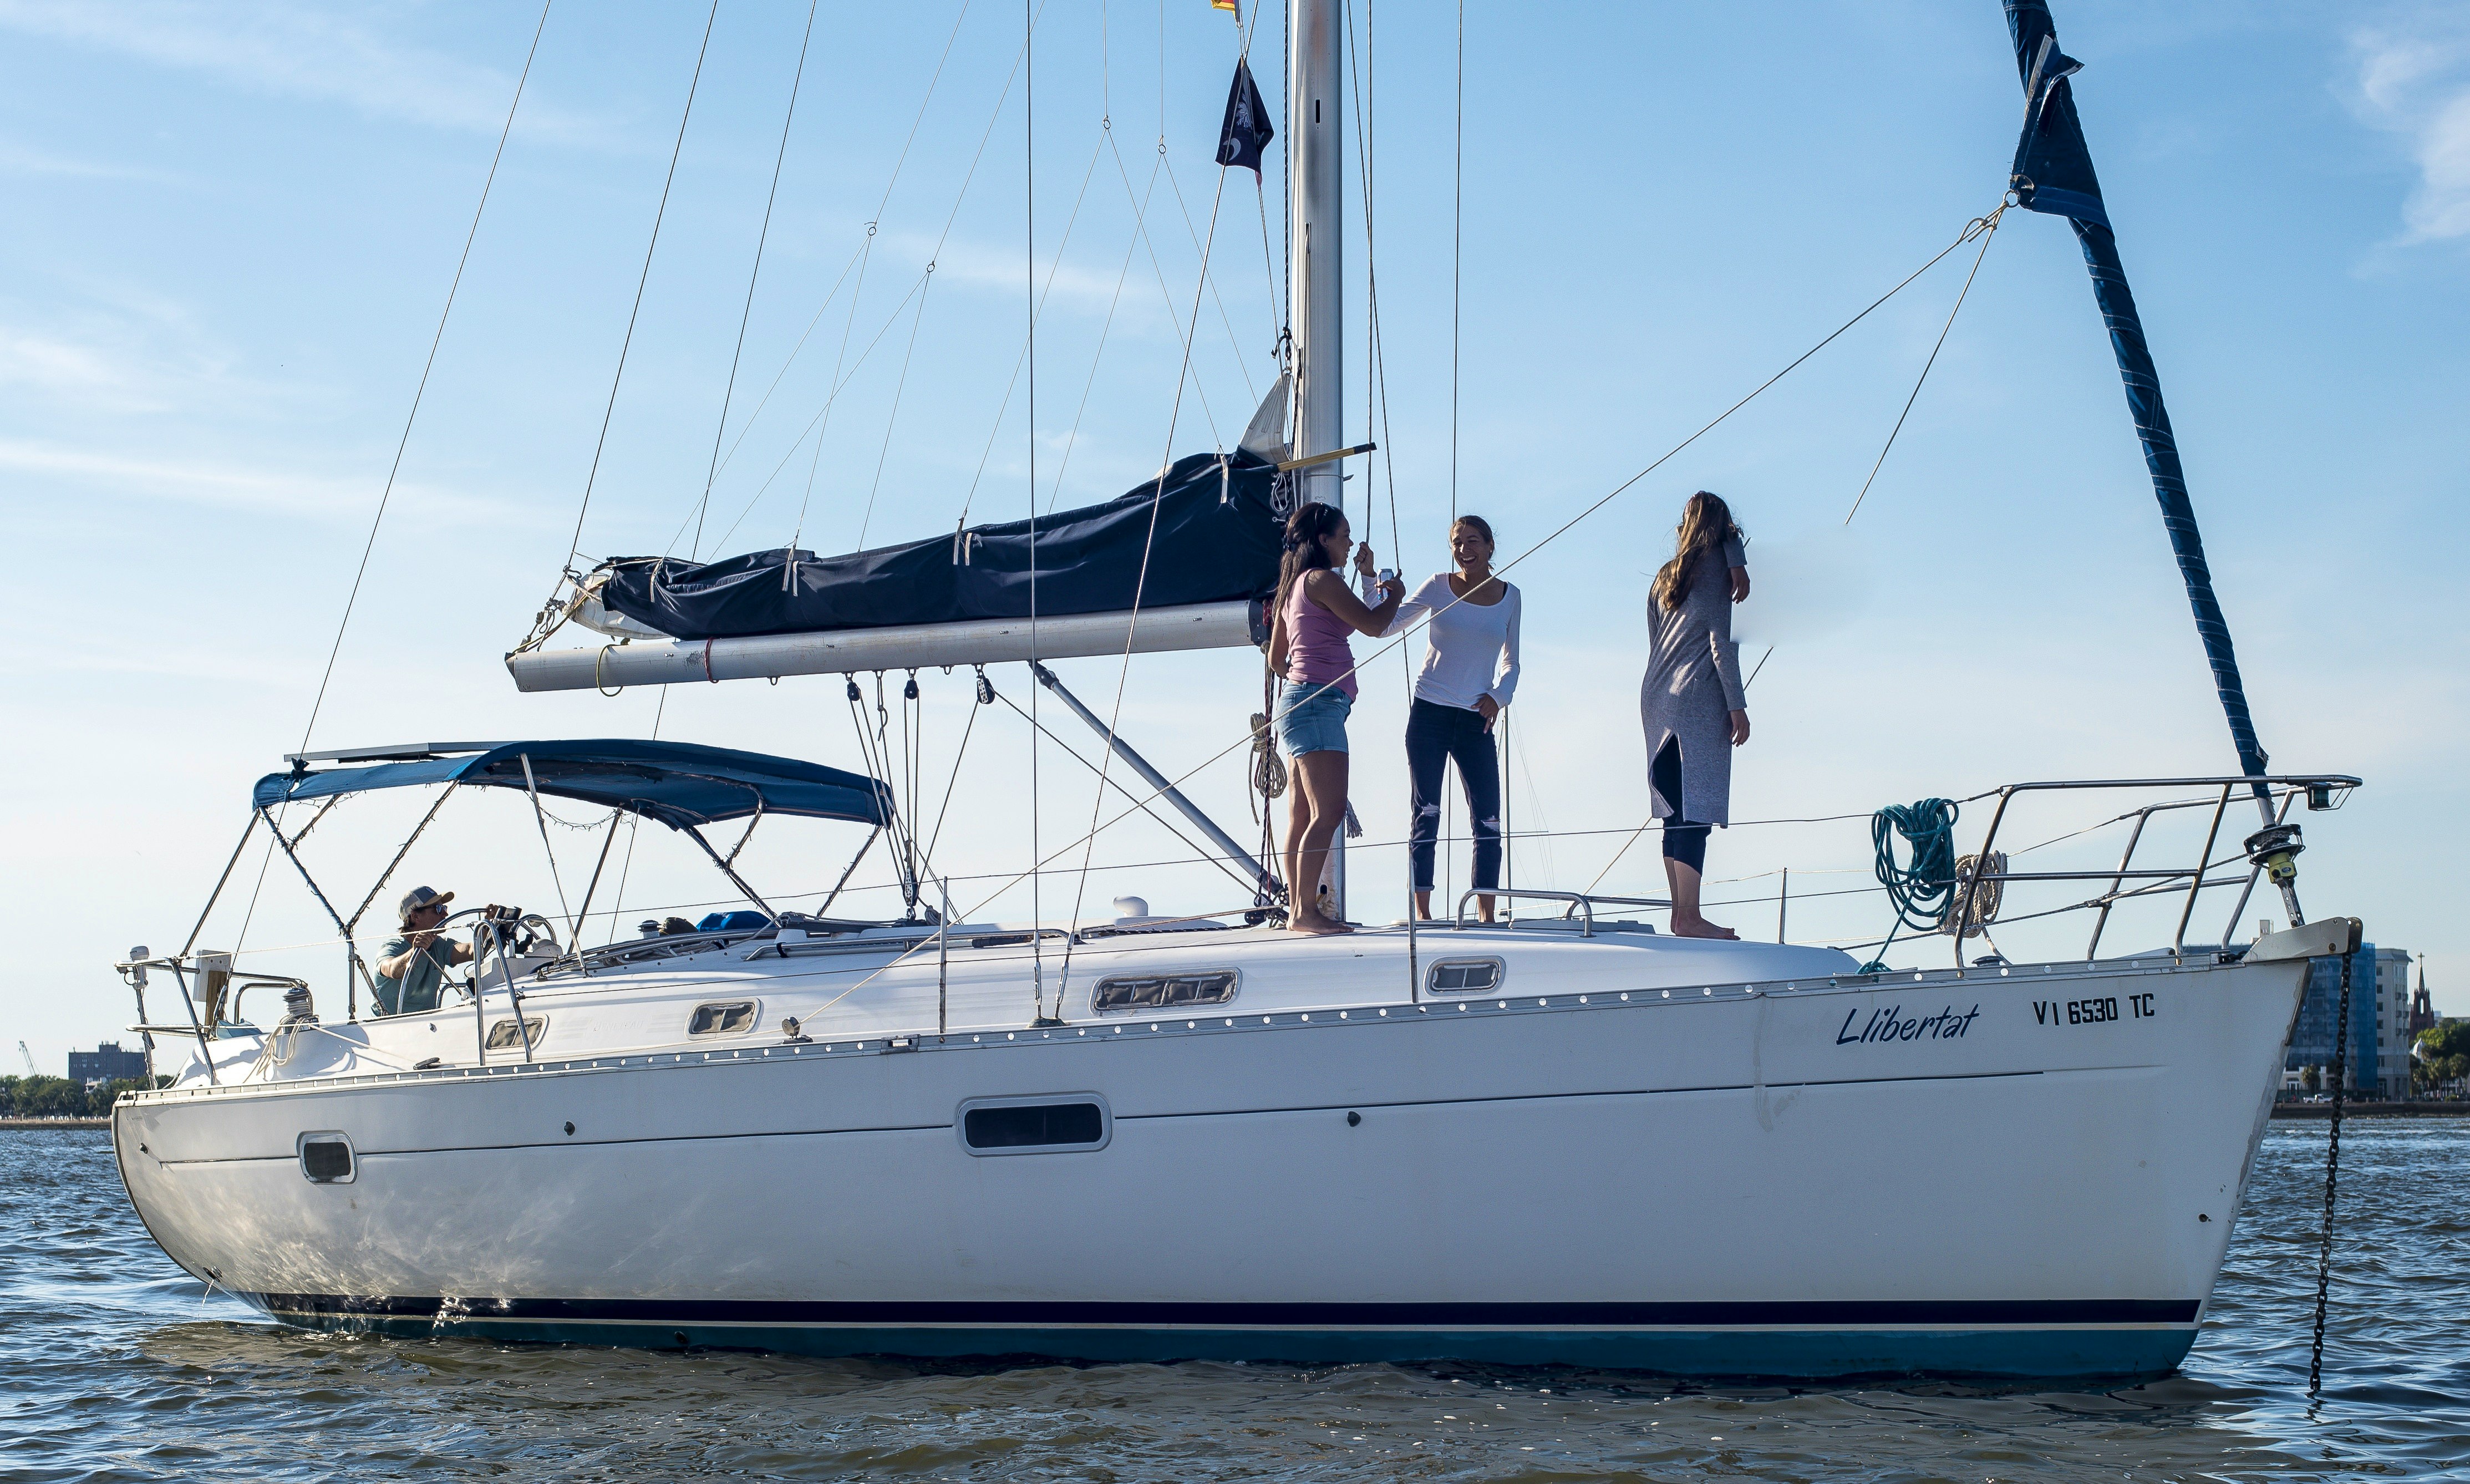 Siteseeing In Style On A Cruising Monohull Yacht In The Charleston Harbor Getmyboat